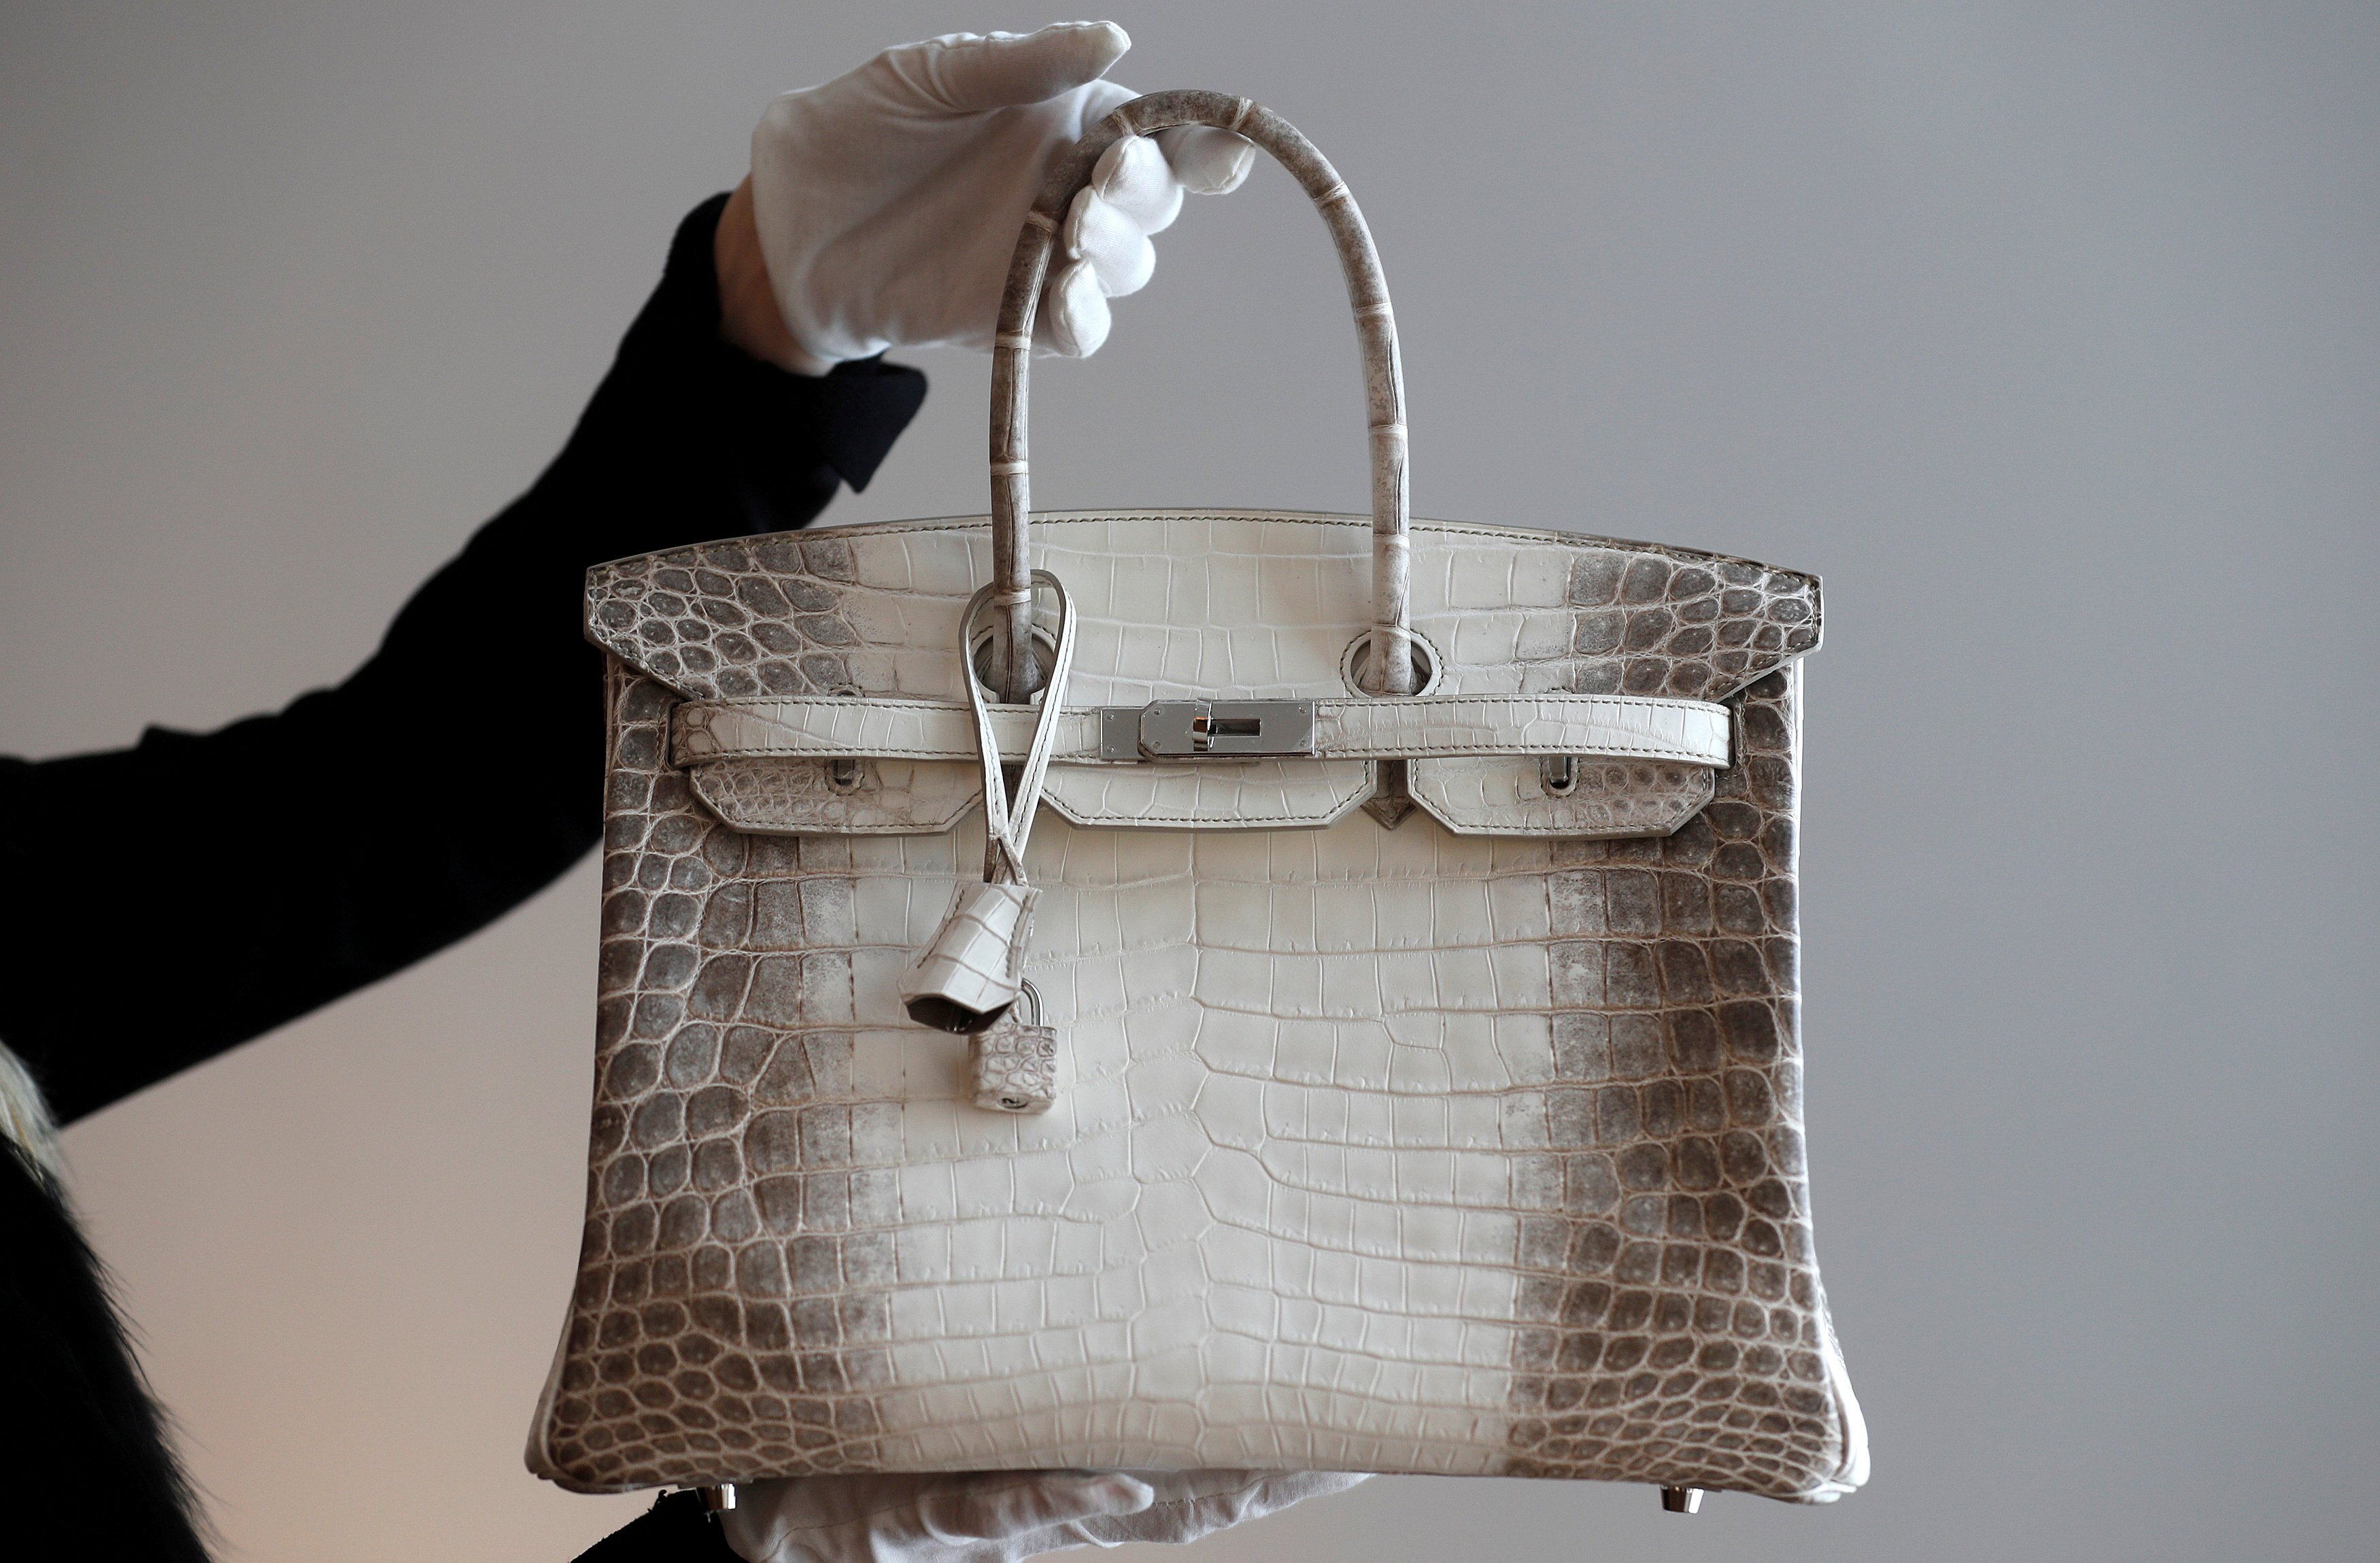 A chance meeting aboard an aeroplane led to the creation of one of the most sought-after luxury accessories, the Hermès Birkin handbag, and this matt white Birkin Himalaya 35 is a still-rarer edition. Photo: Reuters